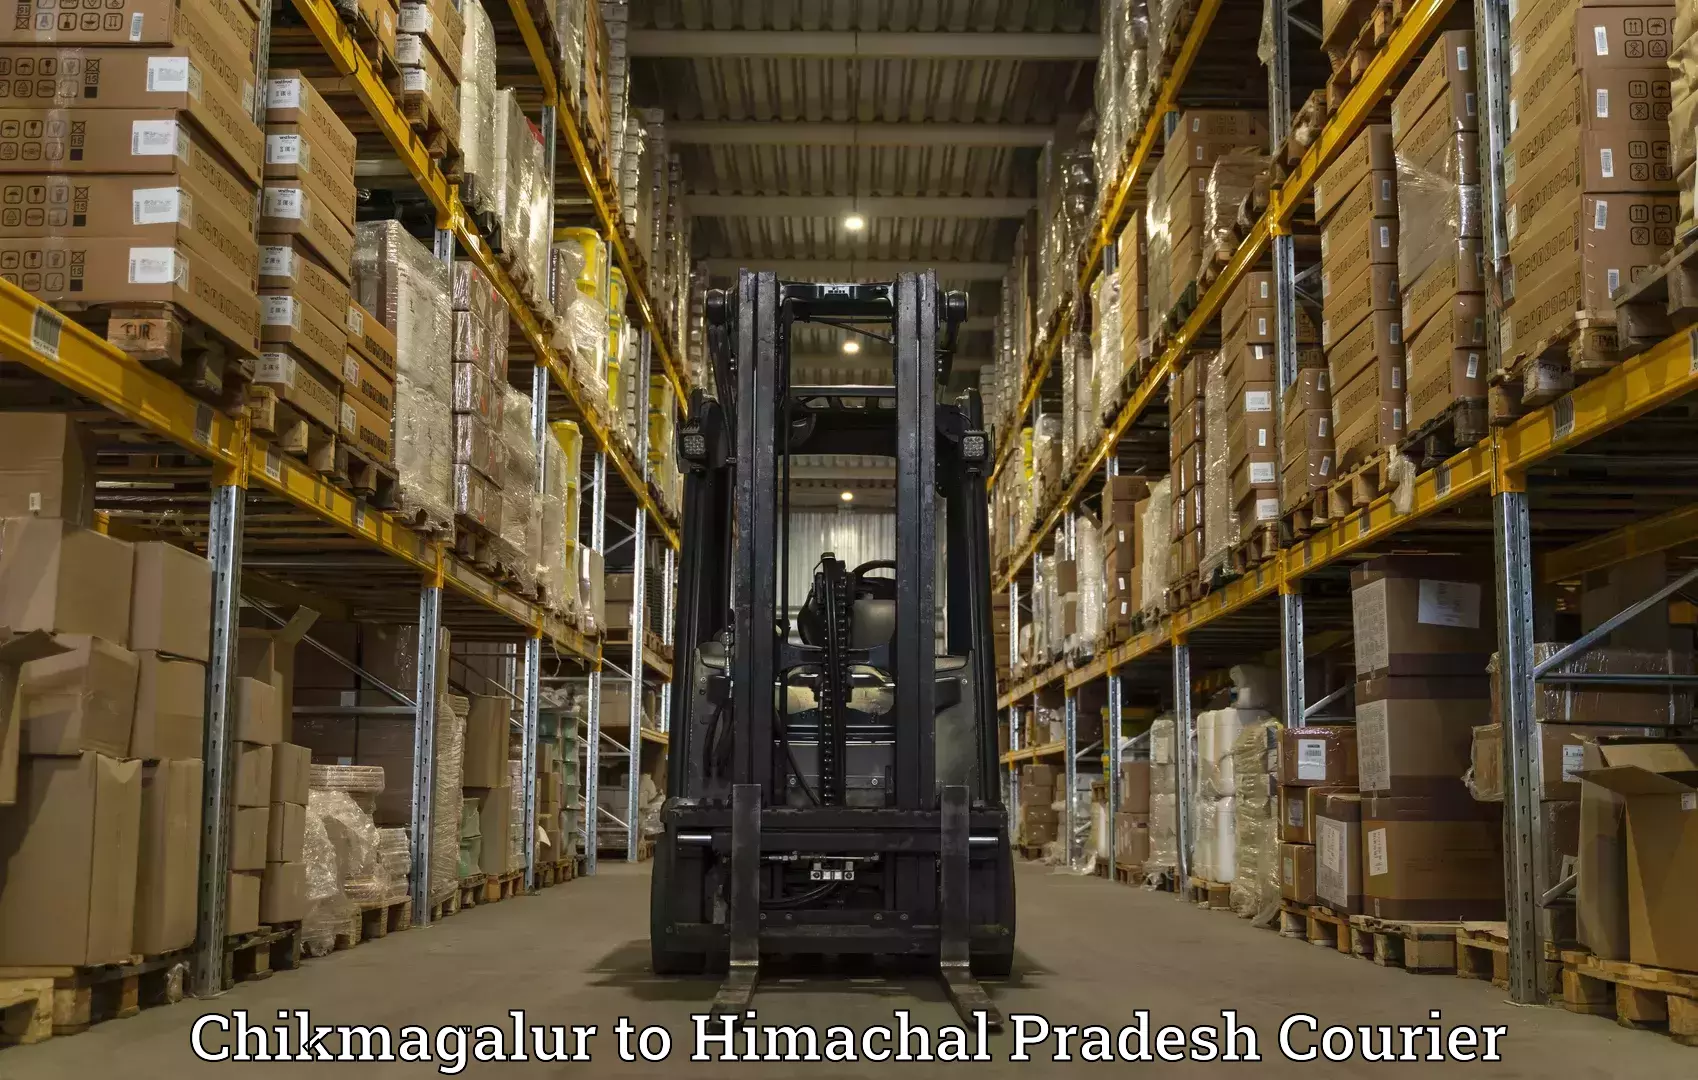 24/7 courier service Chikmagalur to Himachal Pradesh